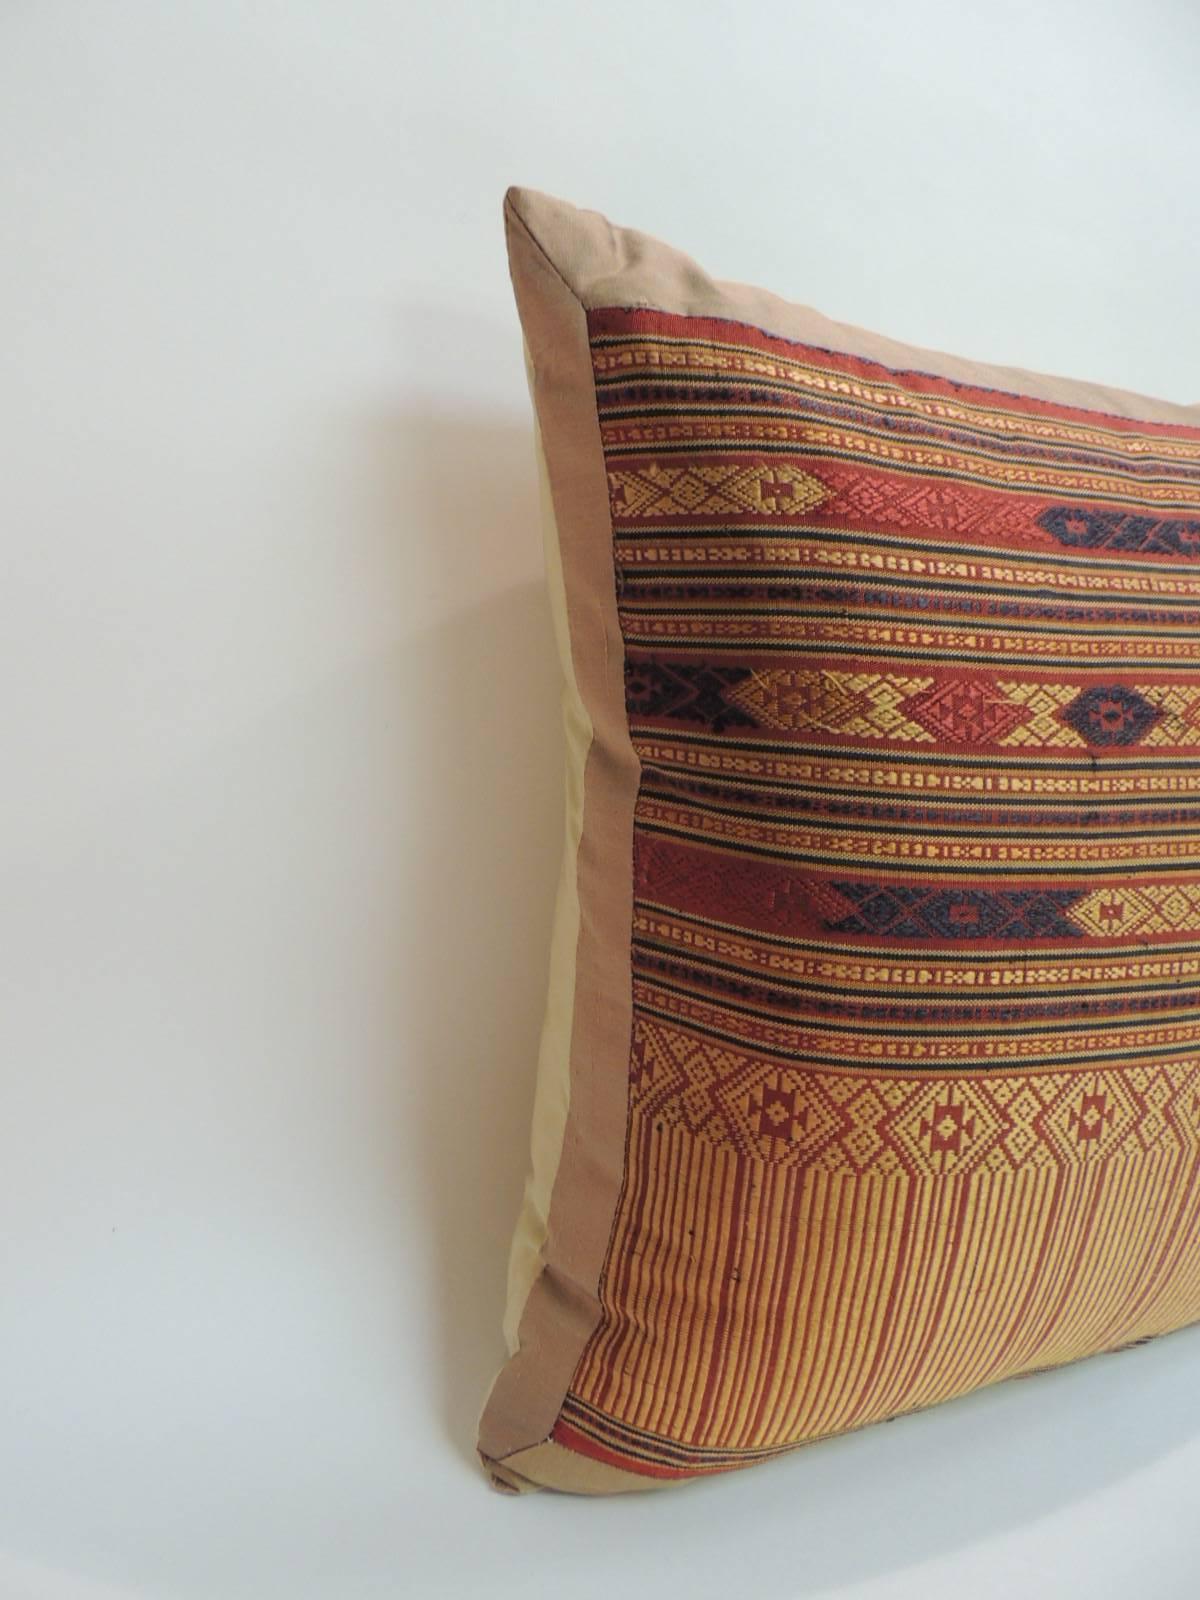 Antique Textiles Galleries:
Vintage silk floss embroidery decorative pillow from laos, with golden silk backing. In shades of red, yellow, gold.
Decorative pillow handcrafted and designed in the USA. Closure by stitch (no zipper closure) with